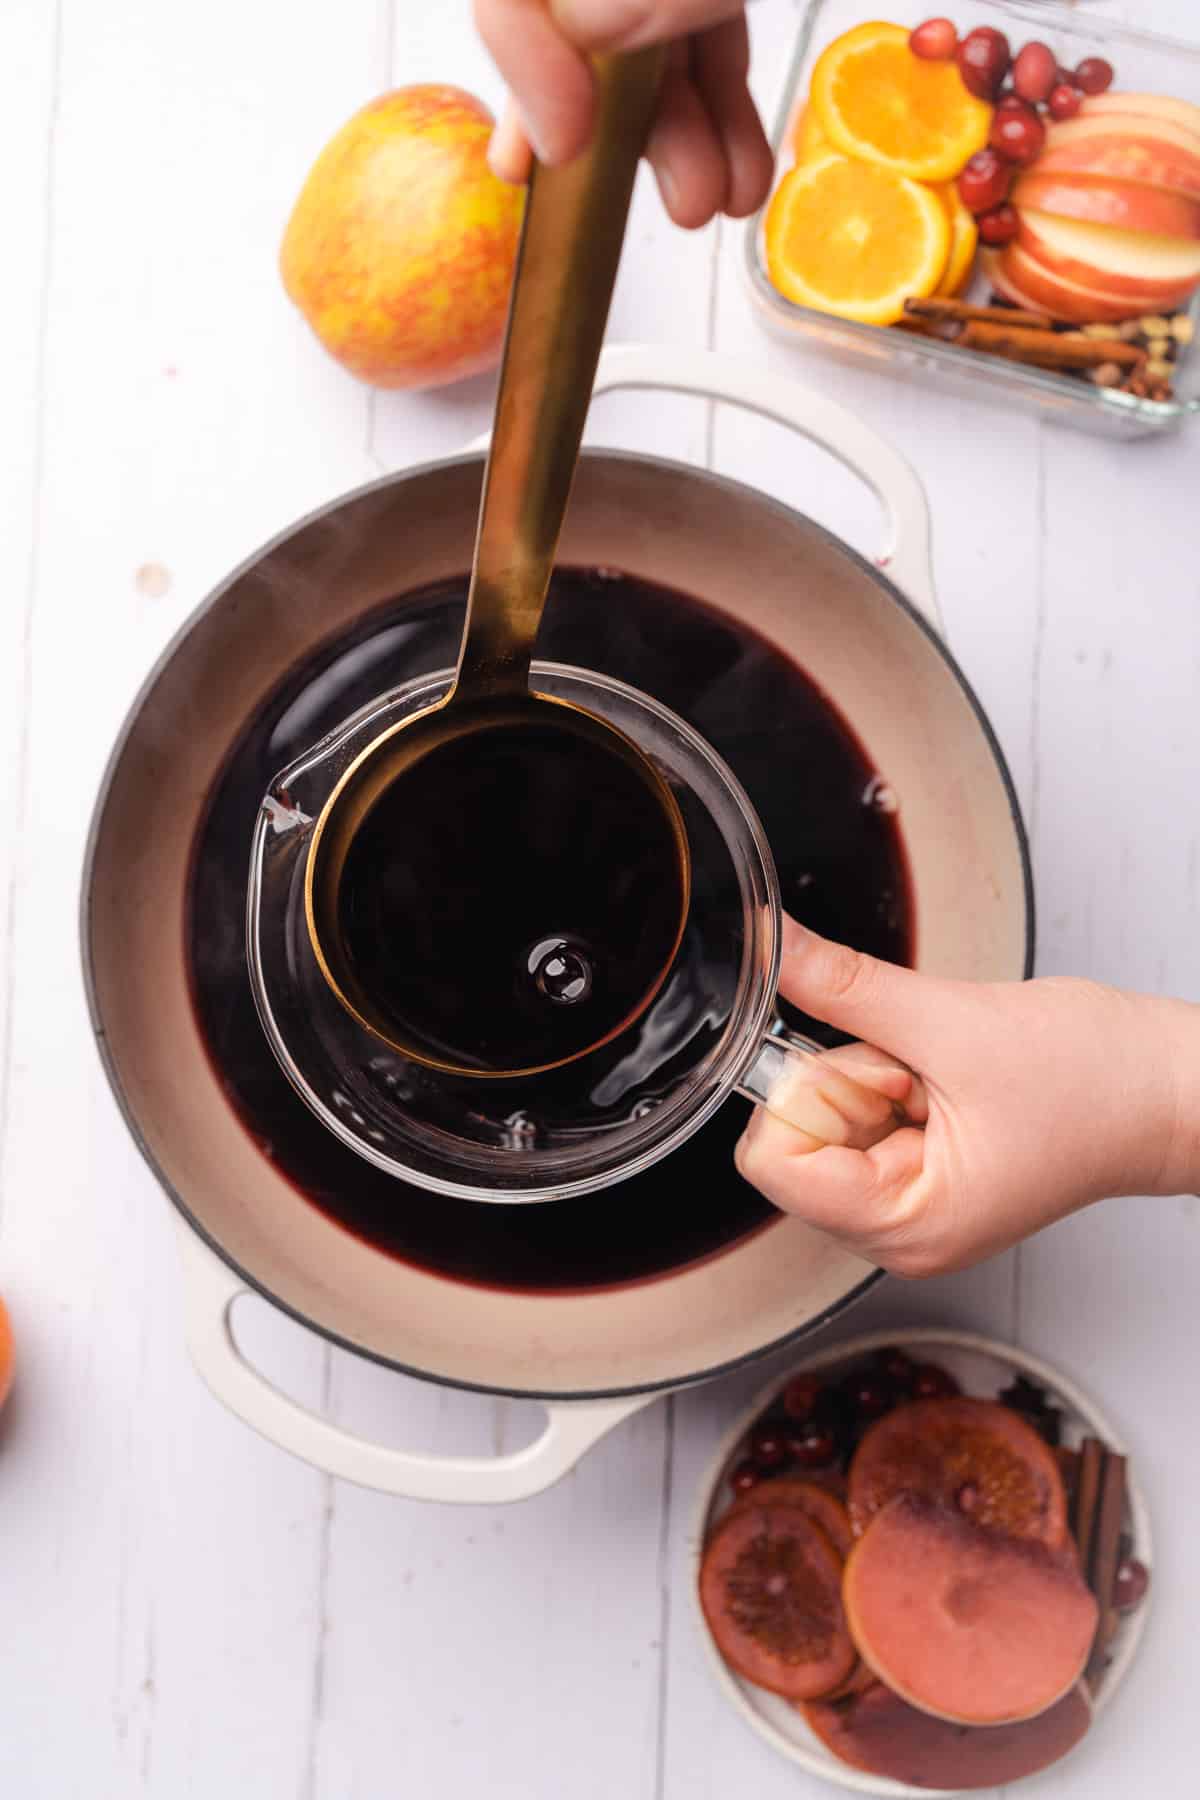 ladeling mulled wine into a glass pitcher from a dutch oven